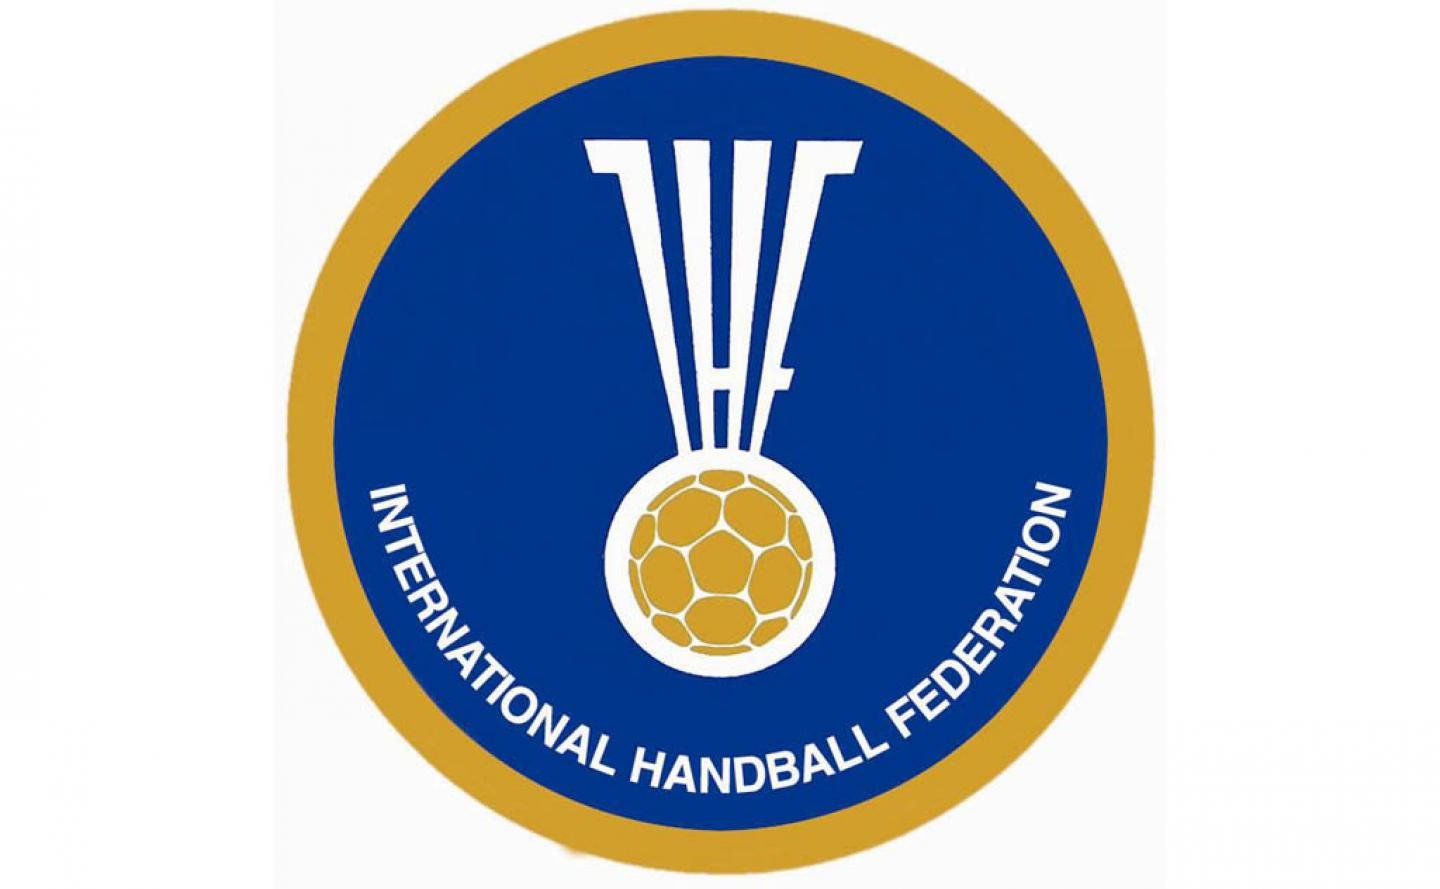 IHF referees for Rio 2016